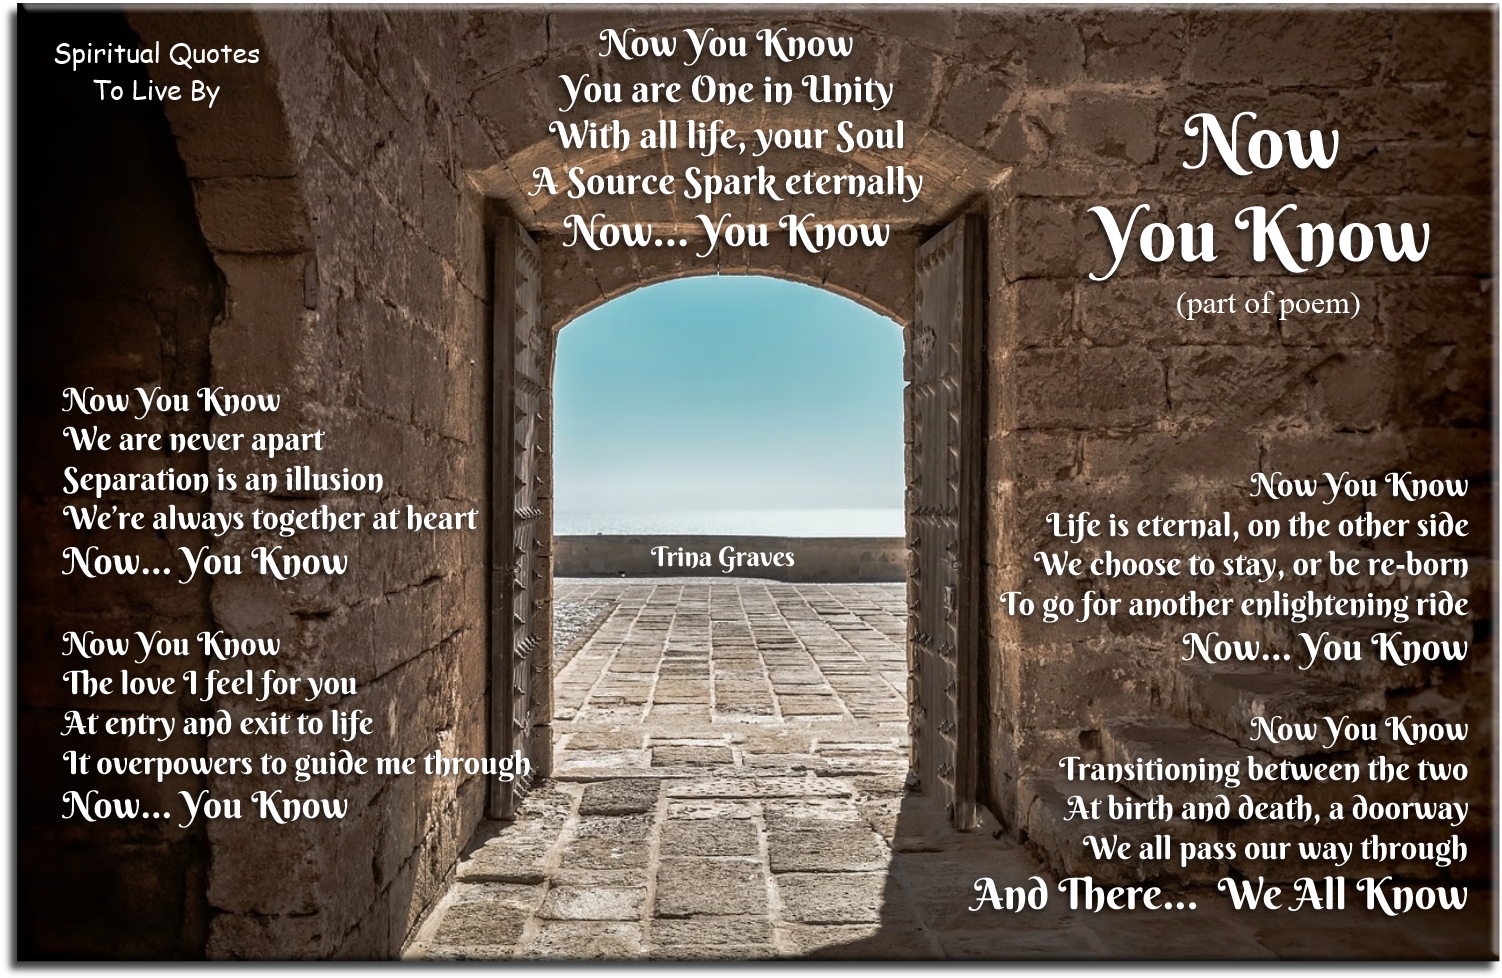 Now You Know by Trina Graves - part of inspirational poem - Spiritual Quotes To Live By